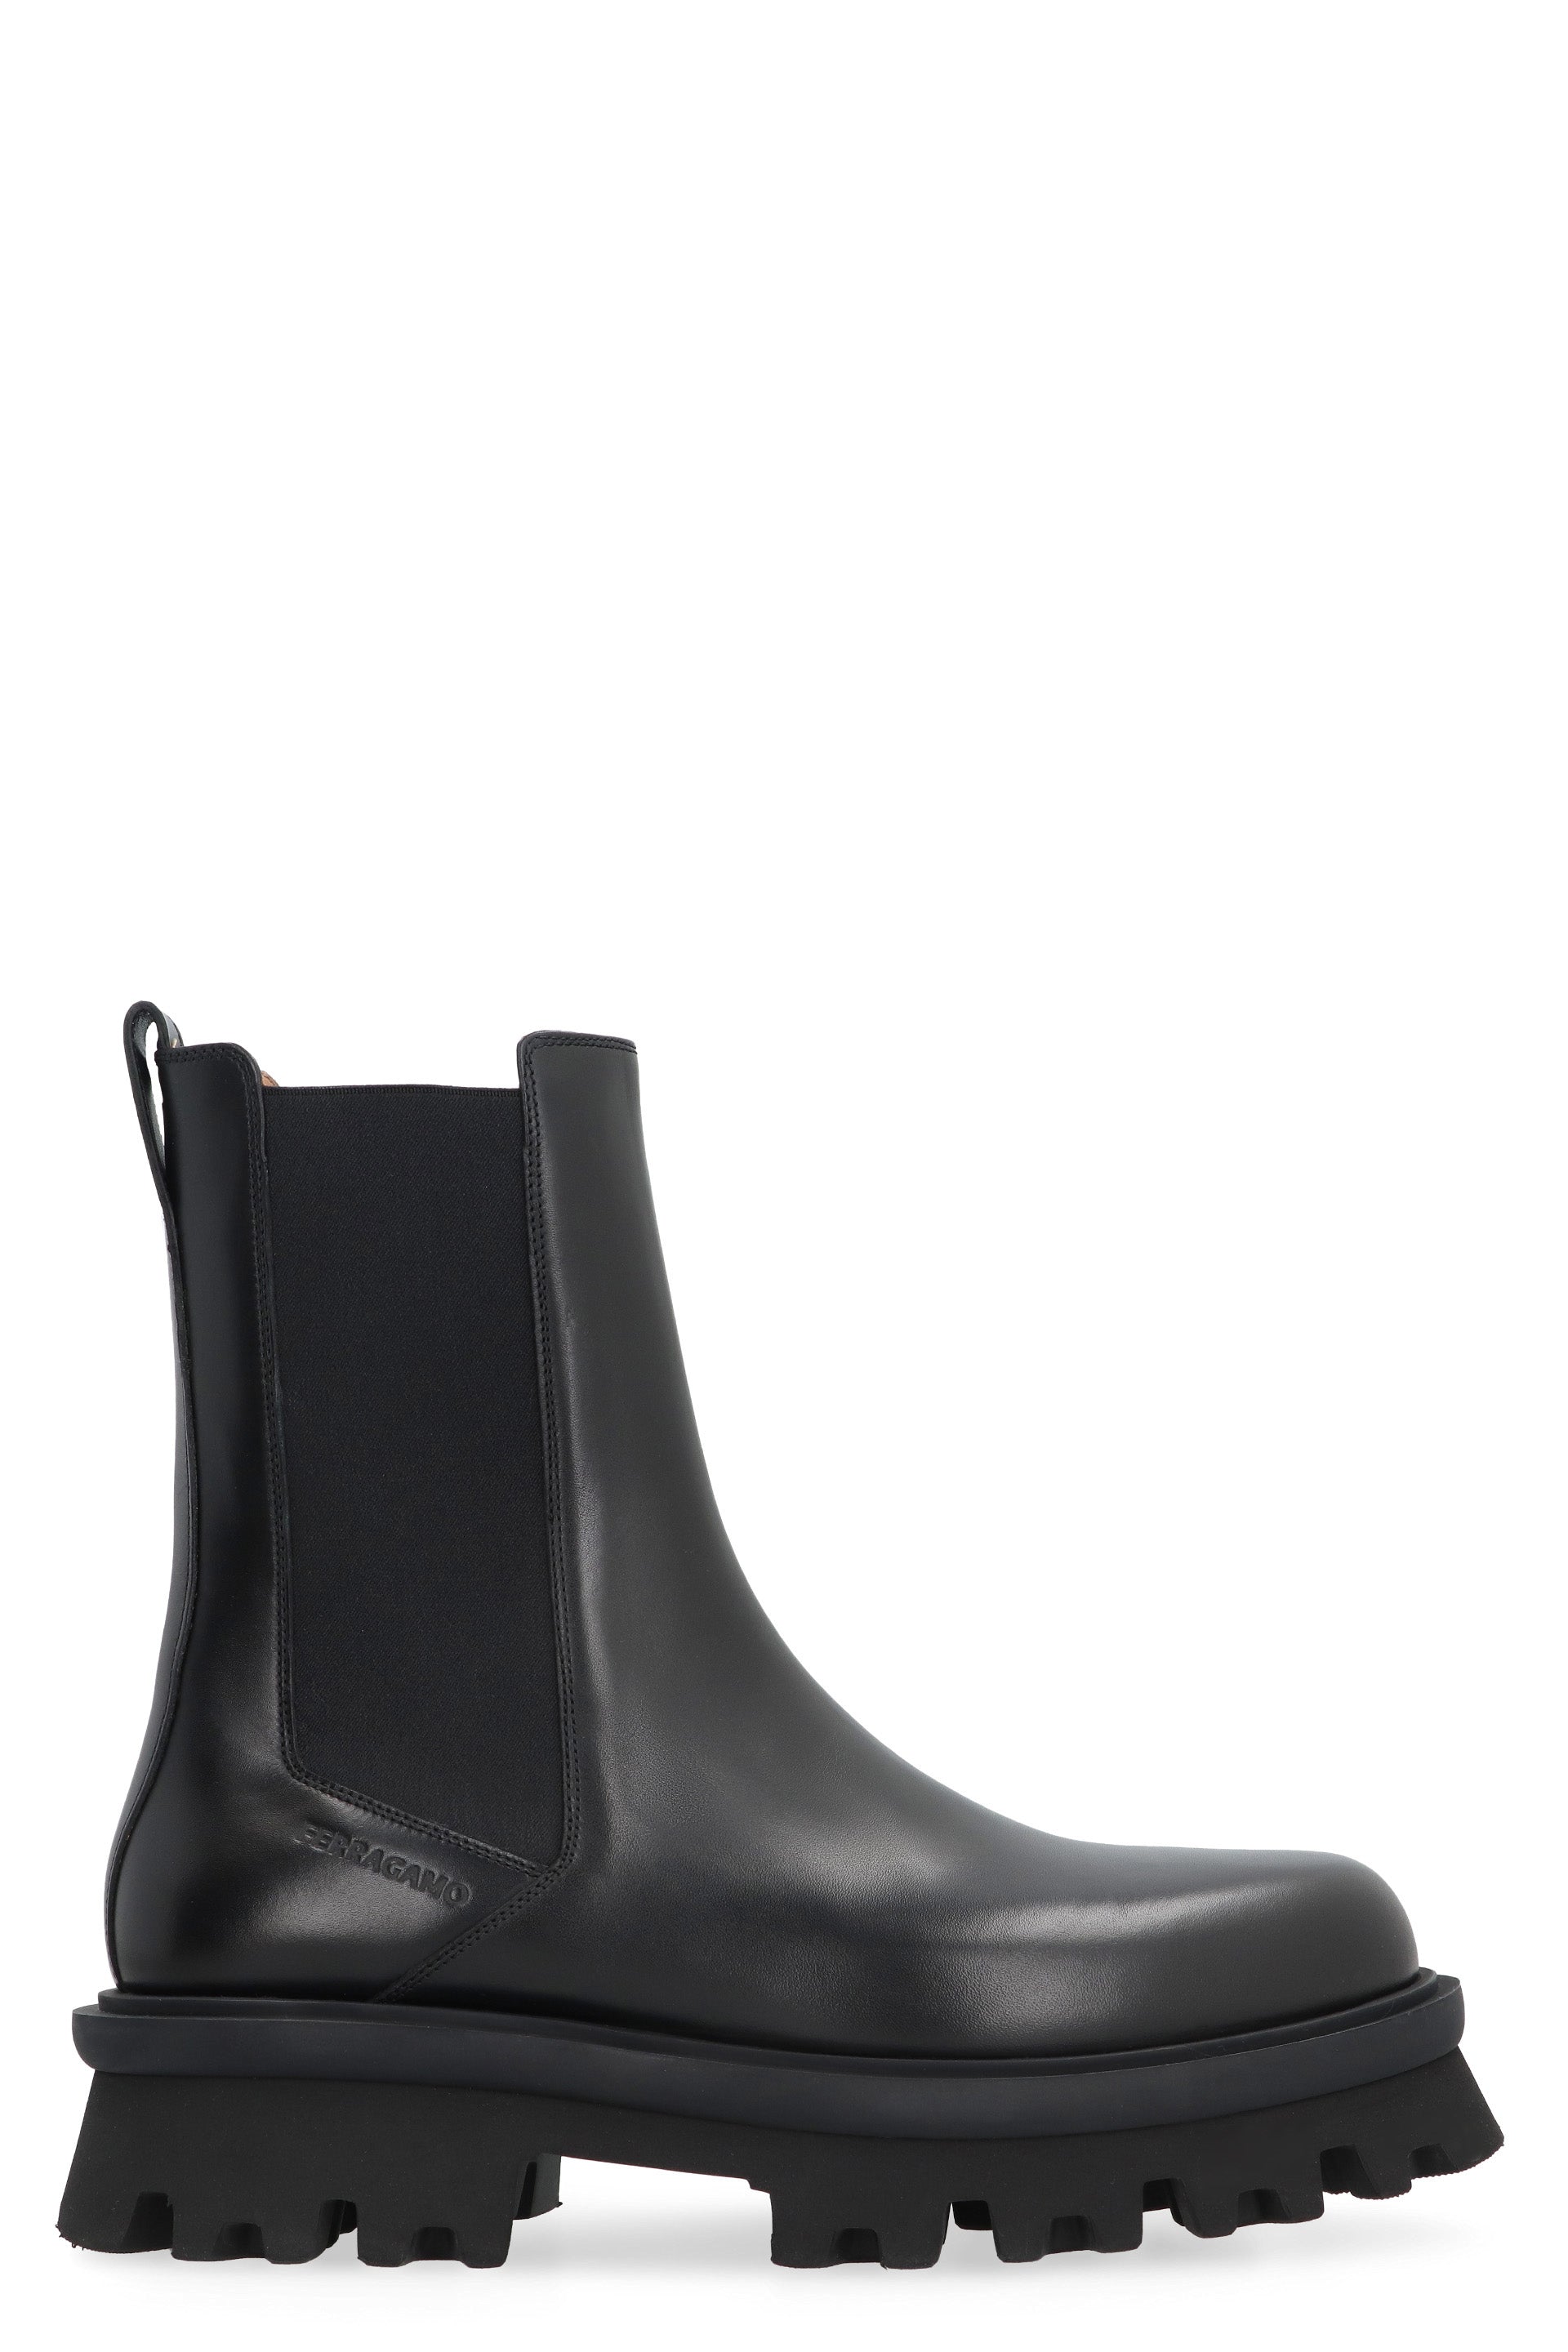 Ferragamo Black Leather Chelsea Boots For Men With Lug Sole And Elastic Inserts